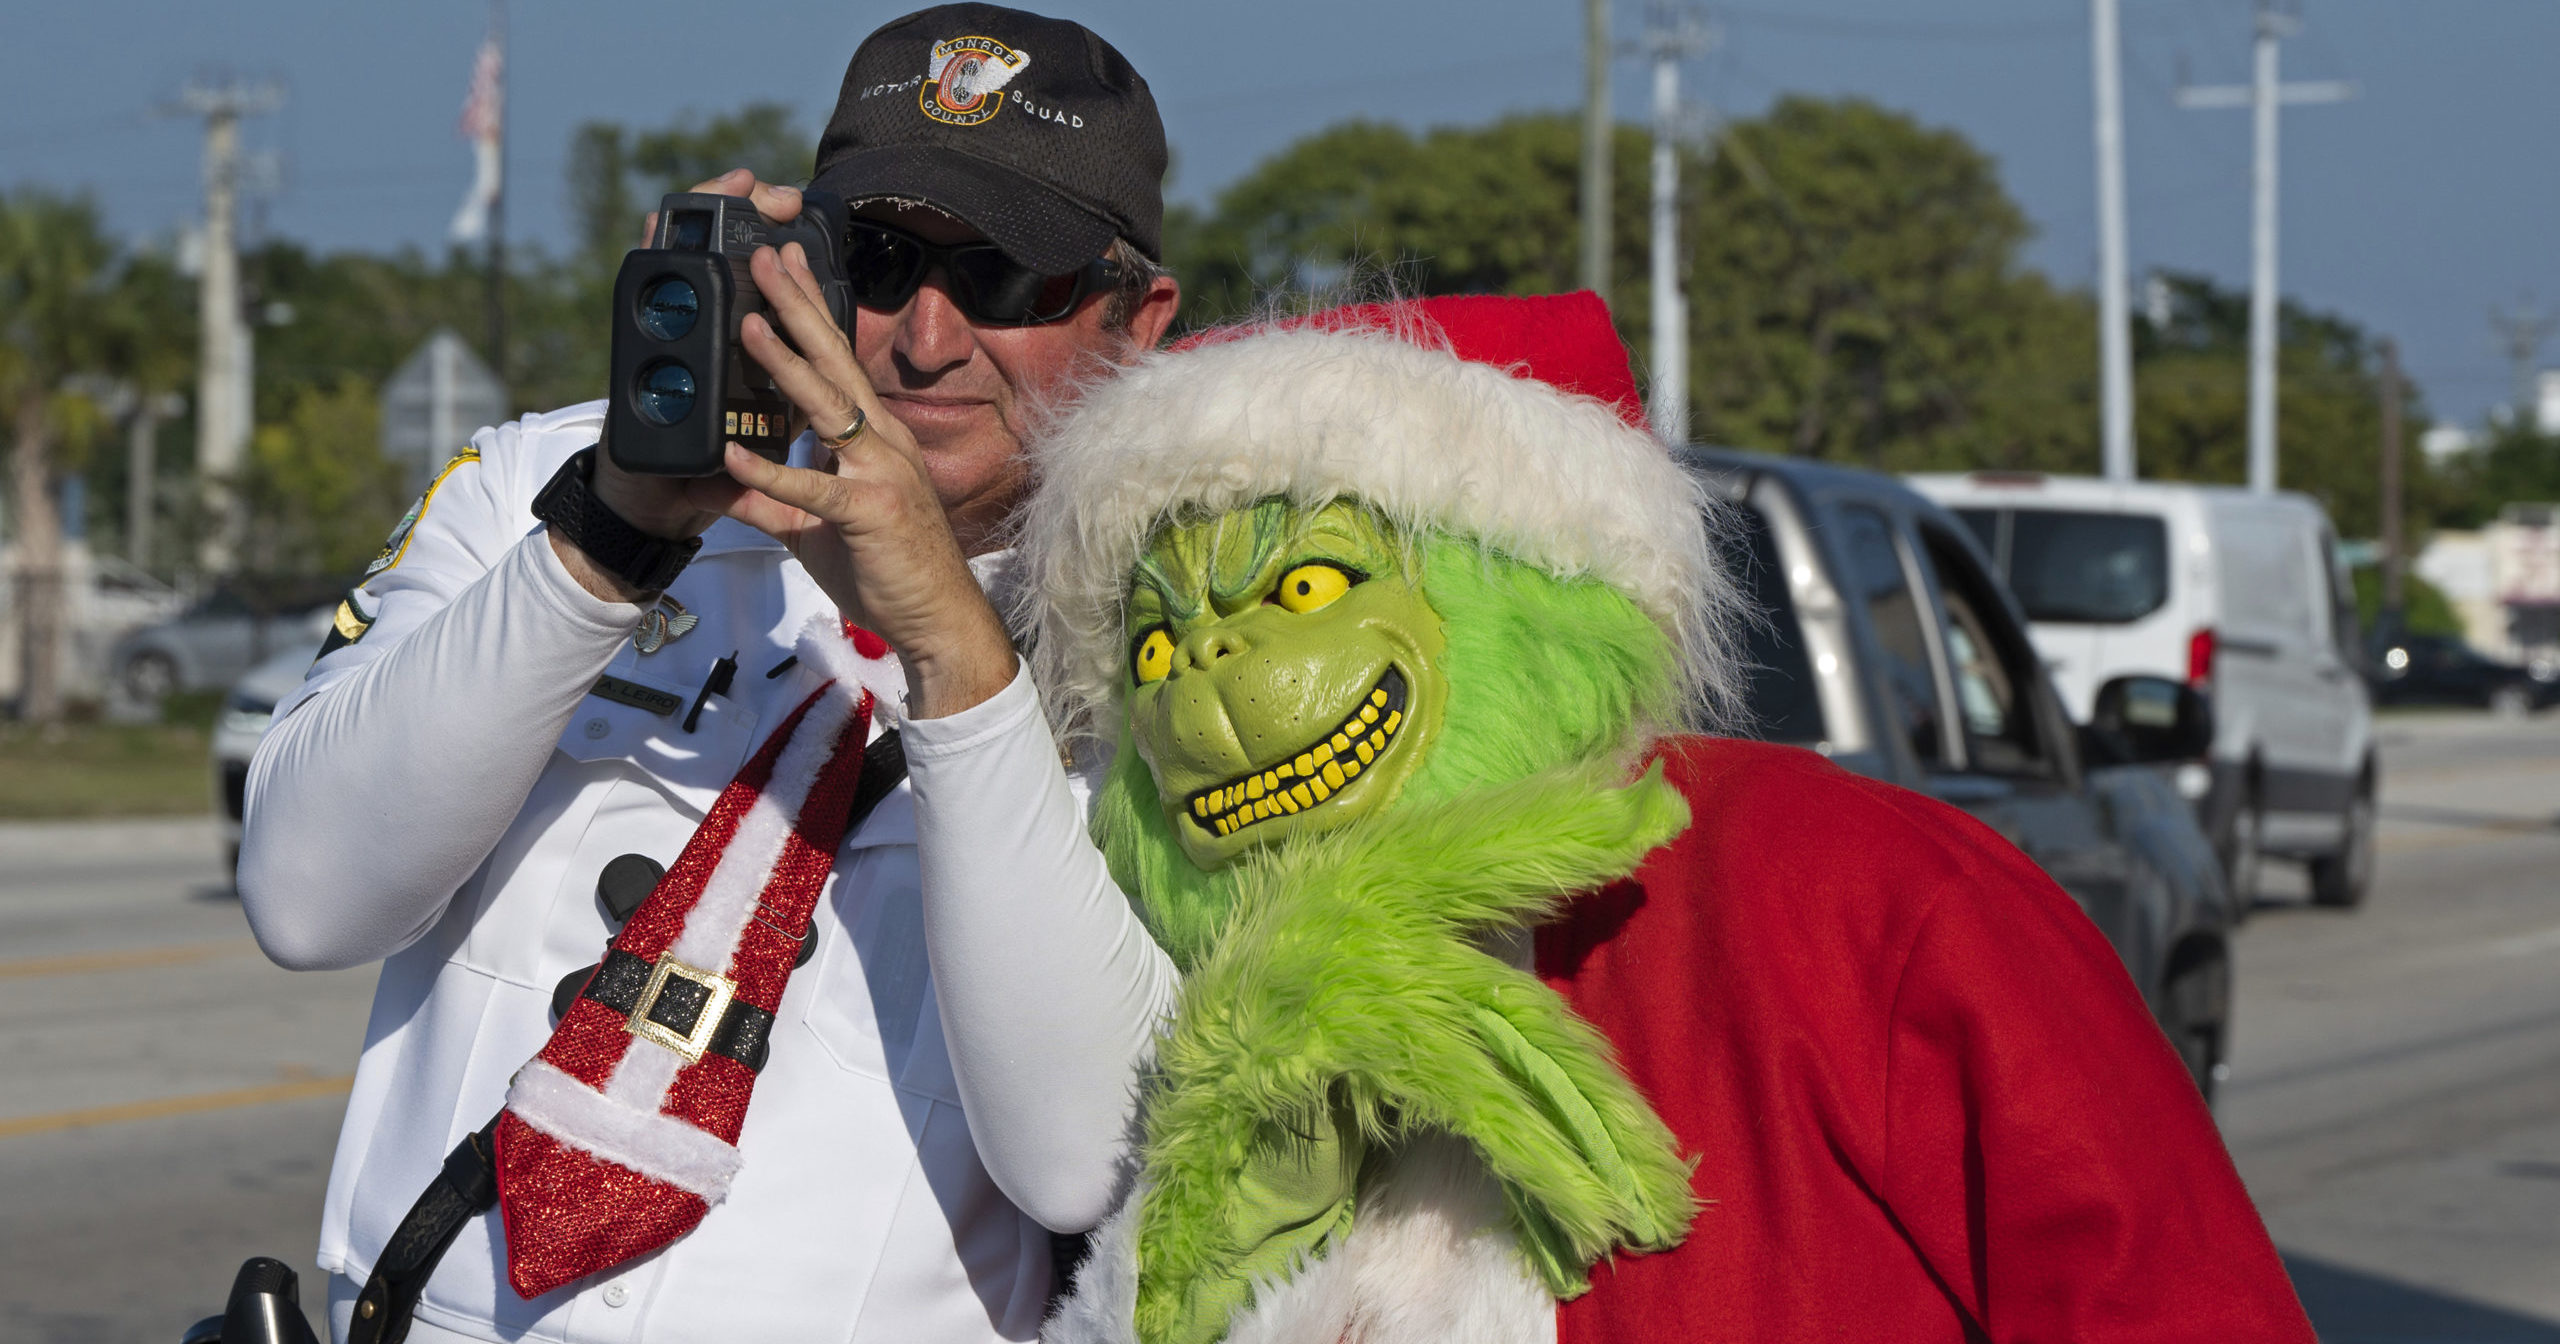 Monroe County Sheriff's Office Col. Lou Caputo, dressed as the Grinch, leans on the shoulder of Deputy Andrew Leird as he checks the speeds of motorists traveling through a school zone on the Florida Keys Overseas Highway in Marathon, Florida, on Tuesday.